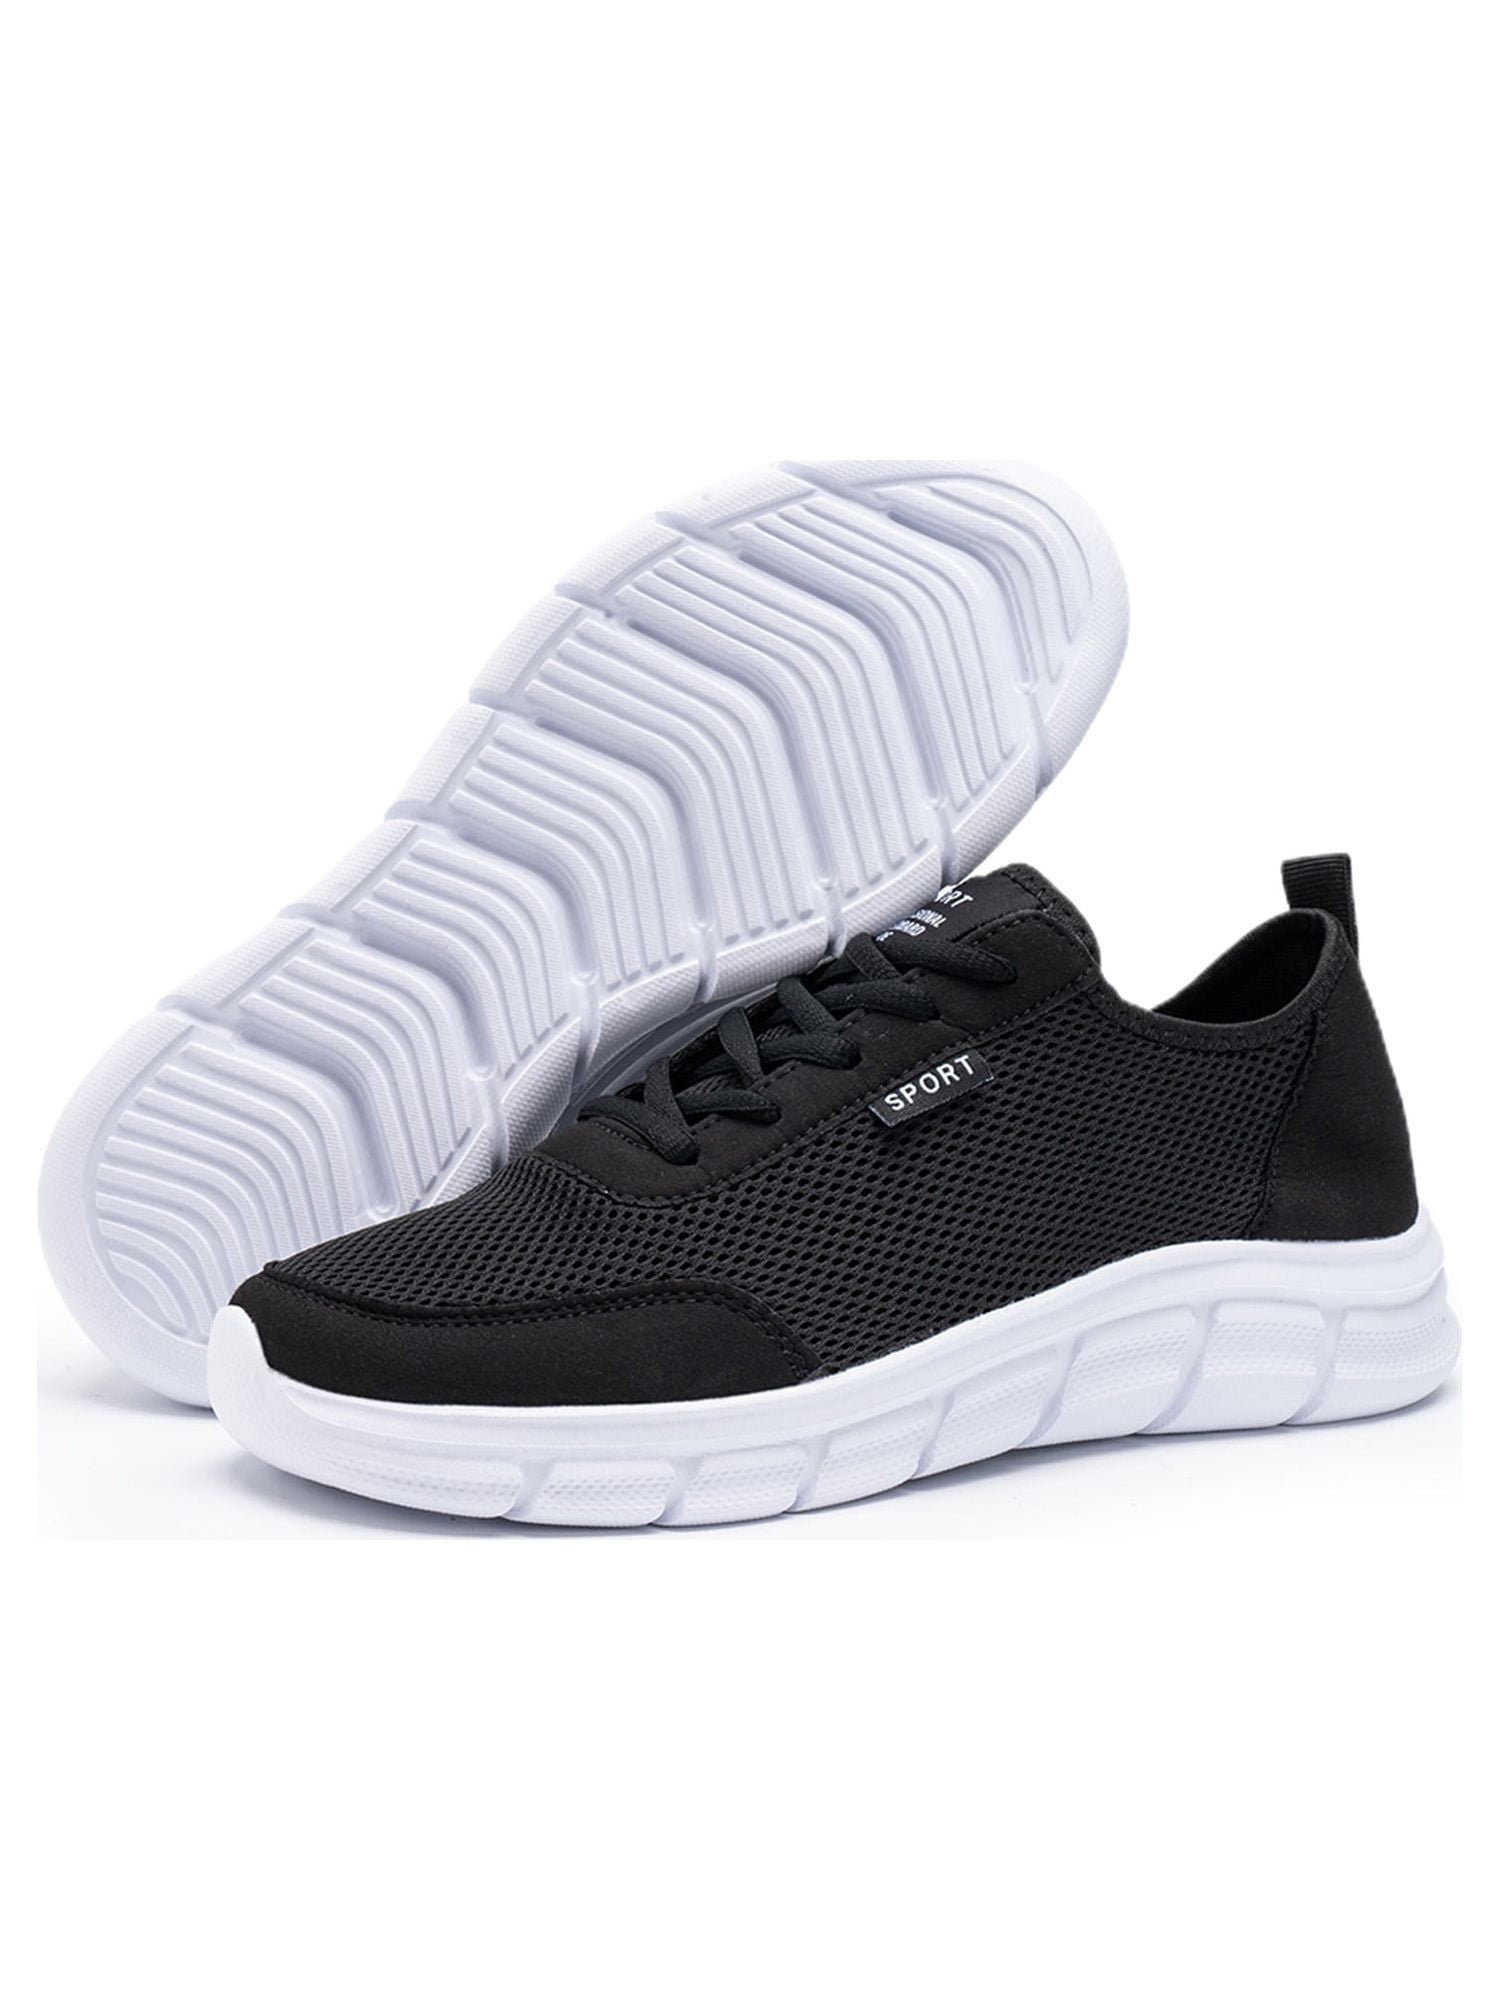 Men's Extra Wide Sneakers Comfor Walking Running Non Slip Lace Up Sport ...